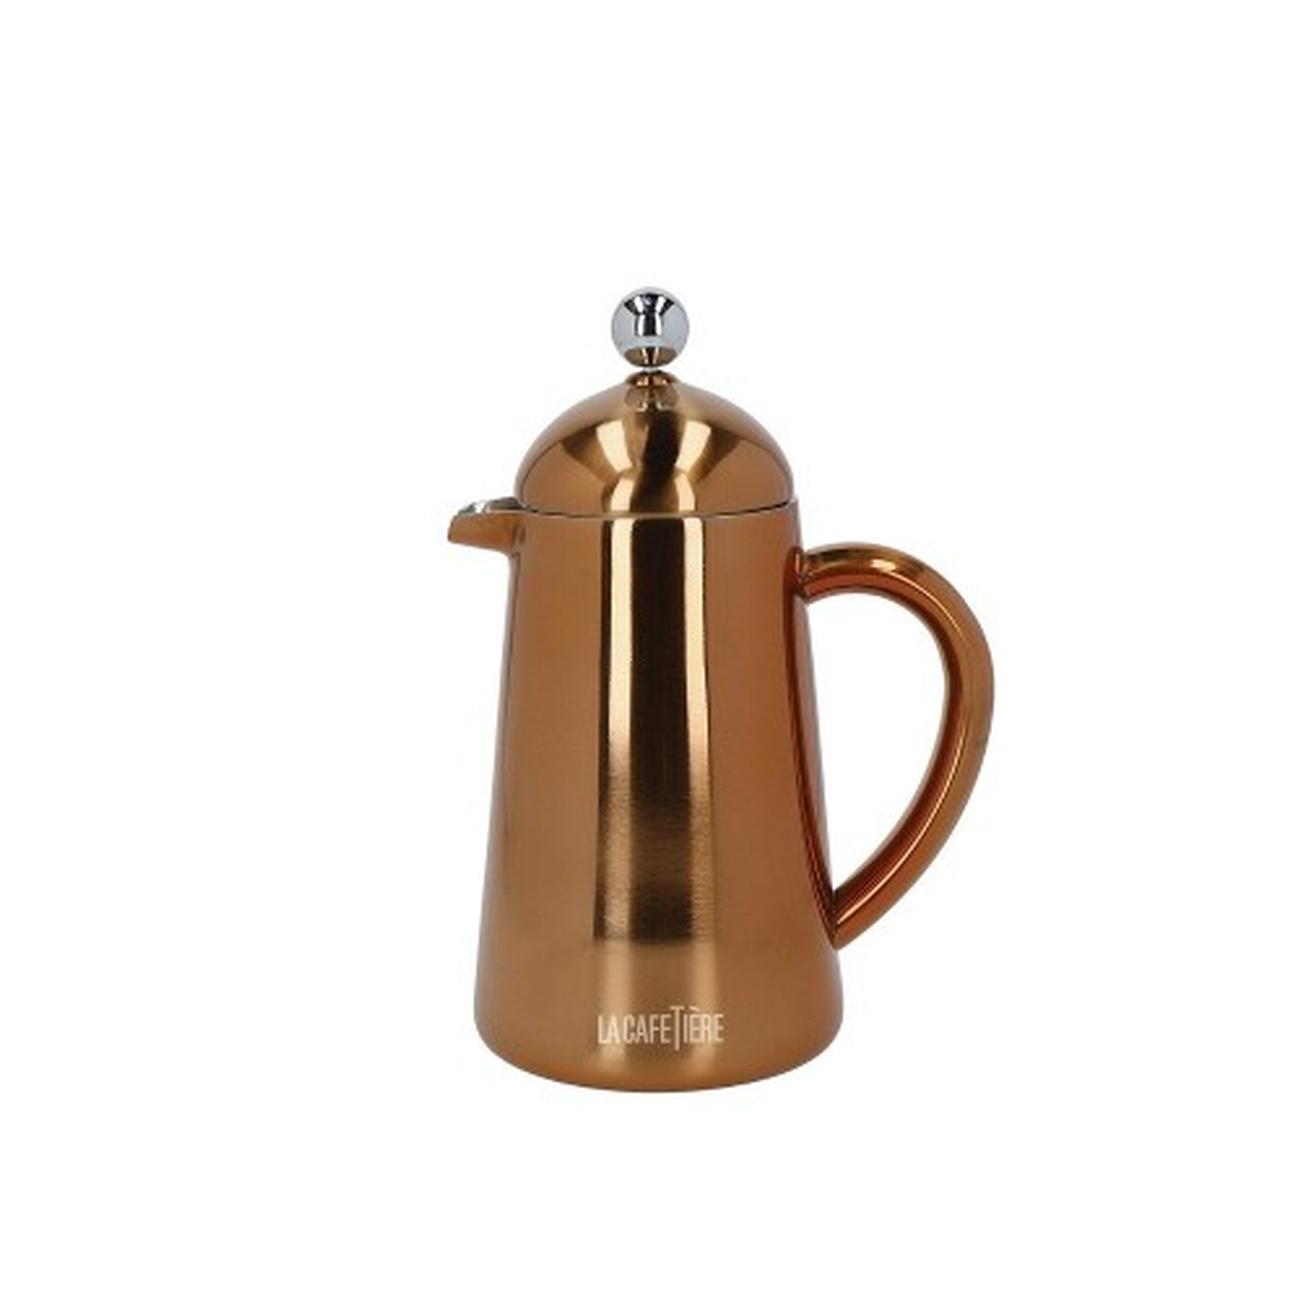 https://www.thekitchenwhisk.ie/contentfiles/productImages/Large/La-Cafetiere-3-Cup-Havana-Double-Walled-Copper-Cafetiere.jpg